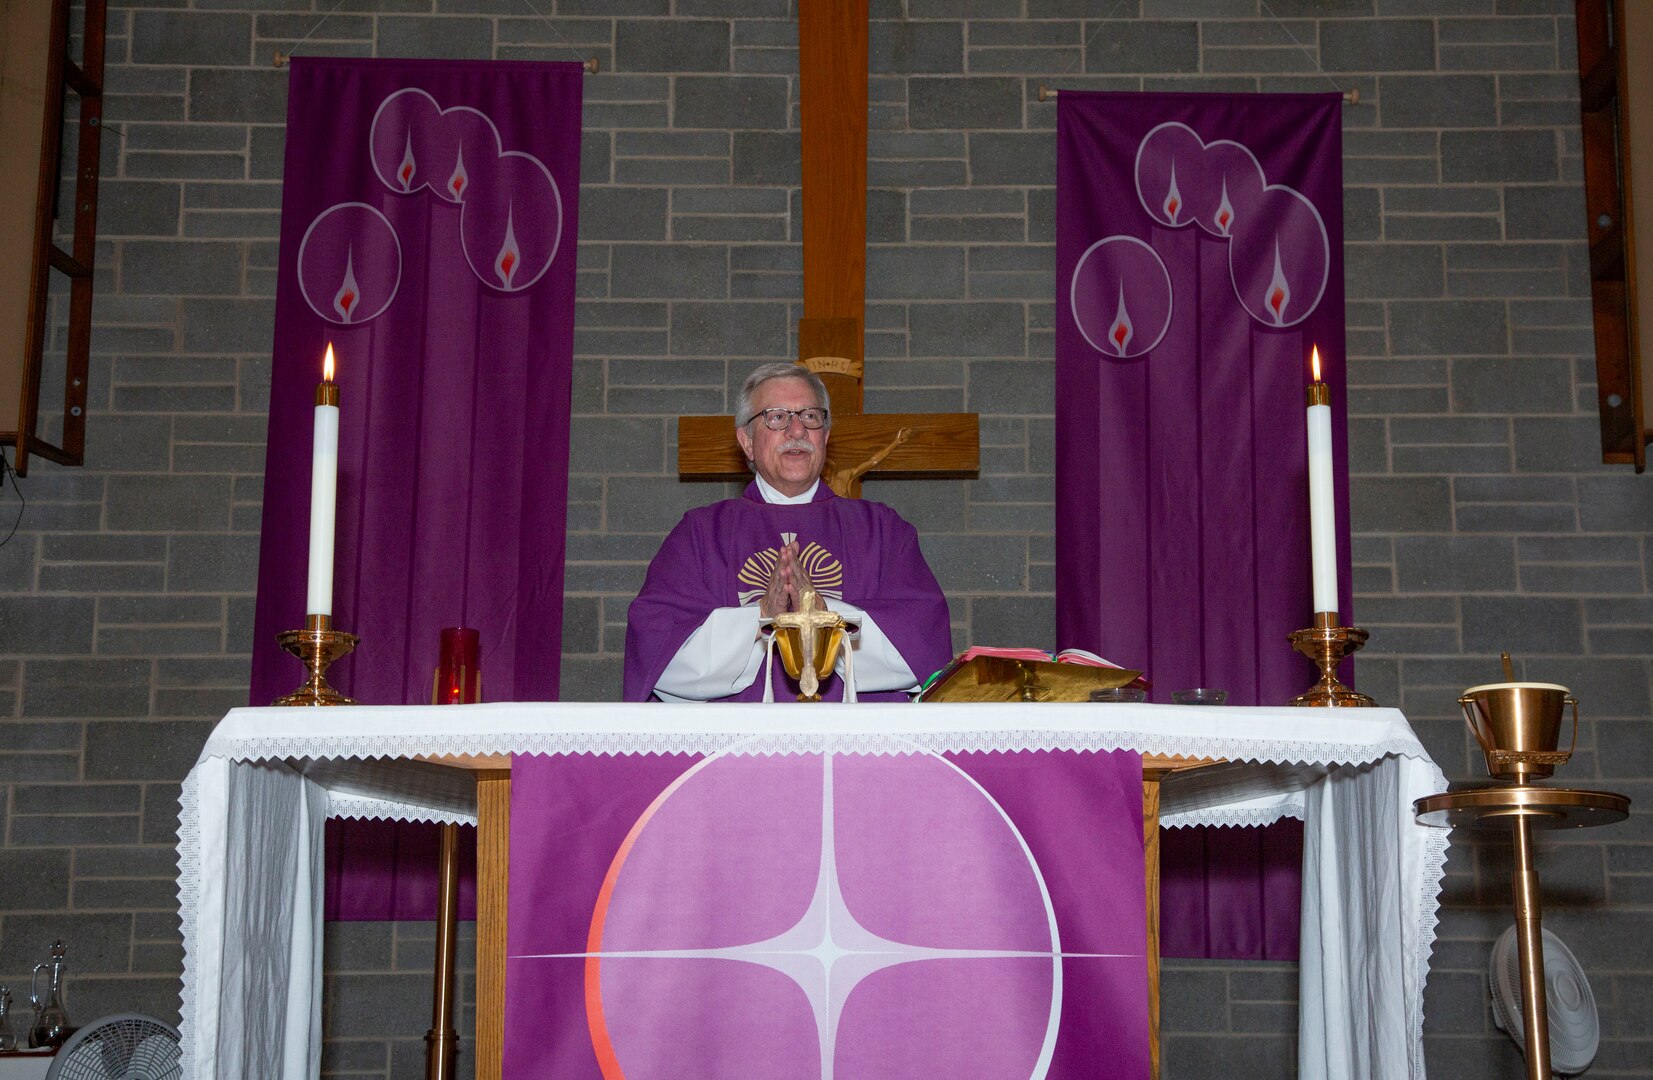 A Catholic priest oversees Ash Wednesday services.